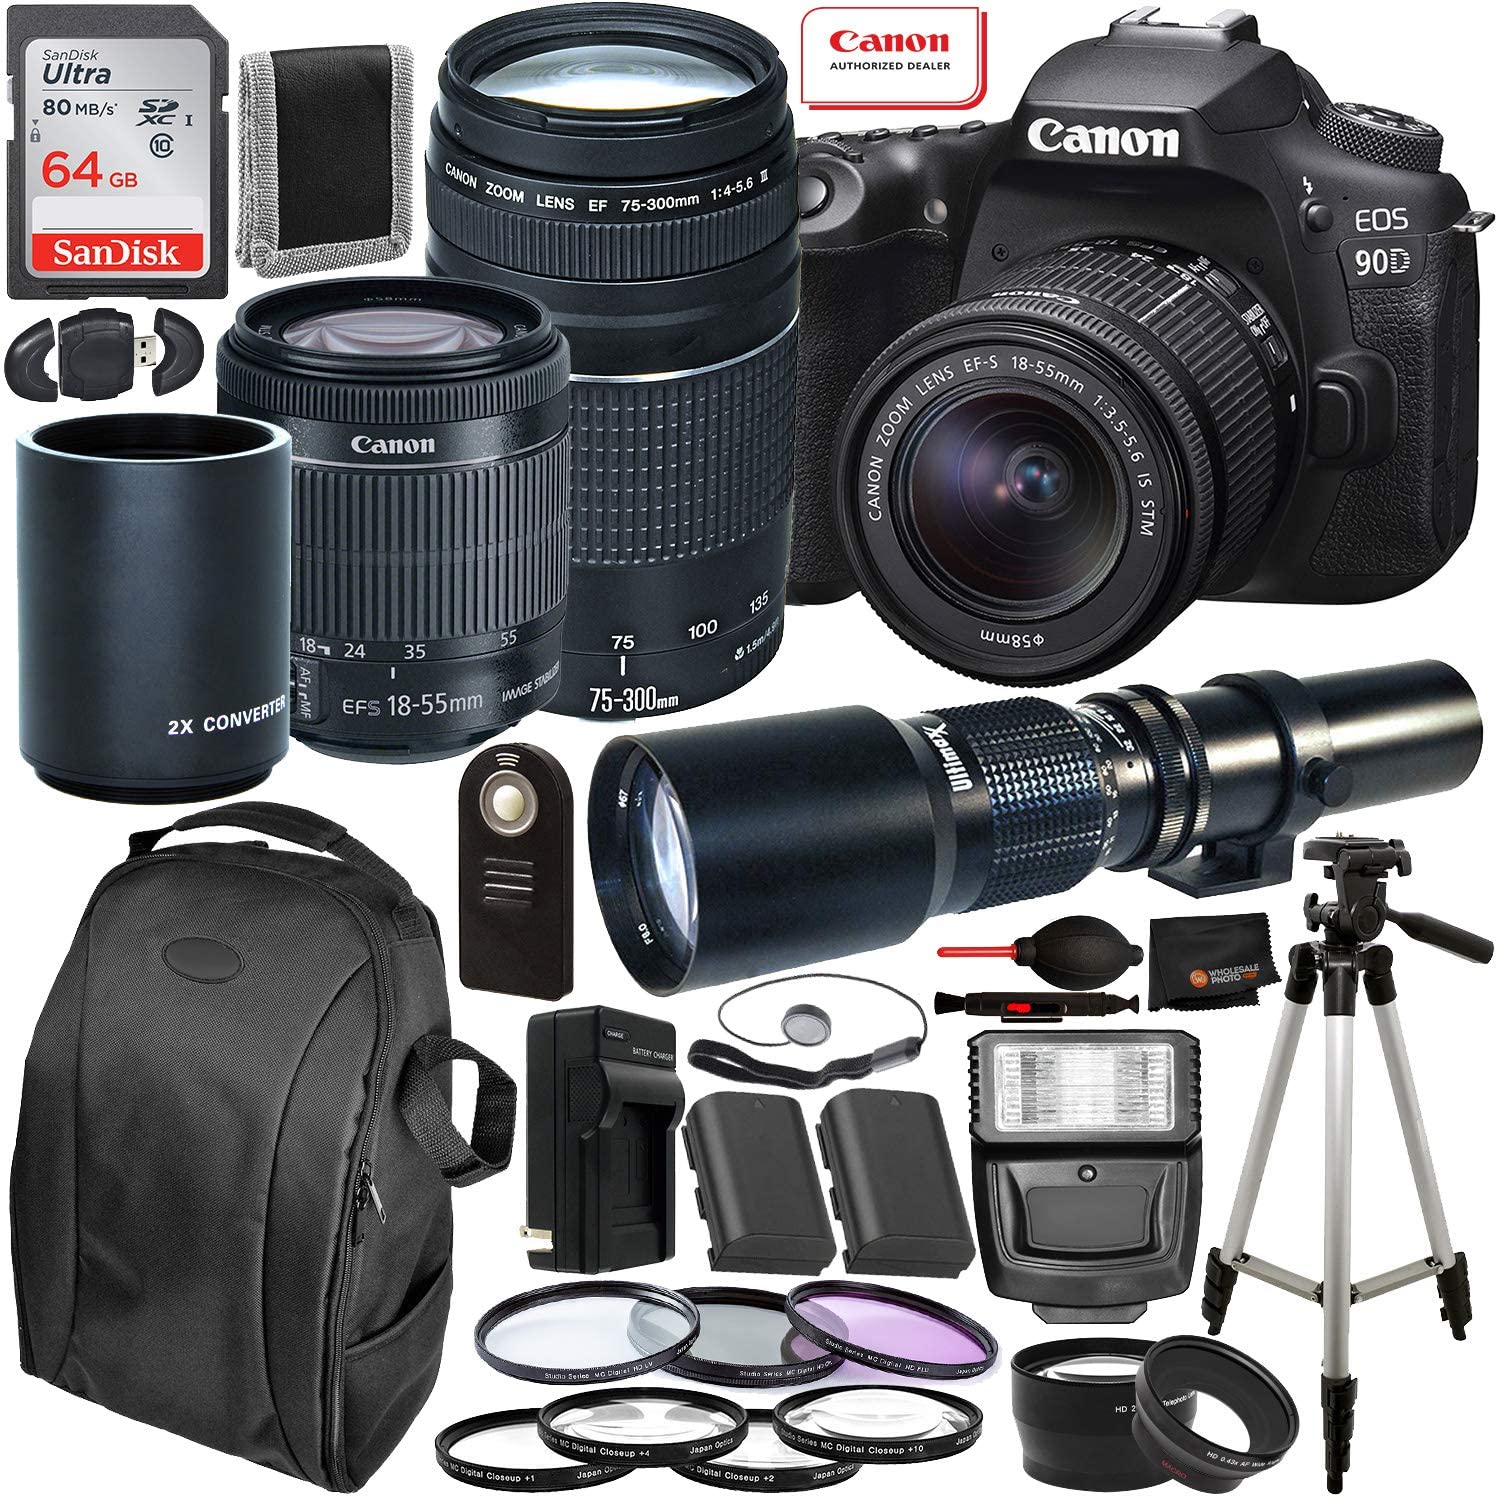 Canon EOS 90D DSLR Camera with 18-55mm (3616C009), 75-300mm & 500mm Lenses with 2X Teleconverter (1000mm) & T-Mount Adapter Professional Bundle â?? Includes: SanDisk Ultra 64GB SDXC Memory Card + More